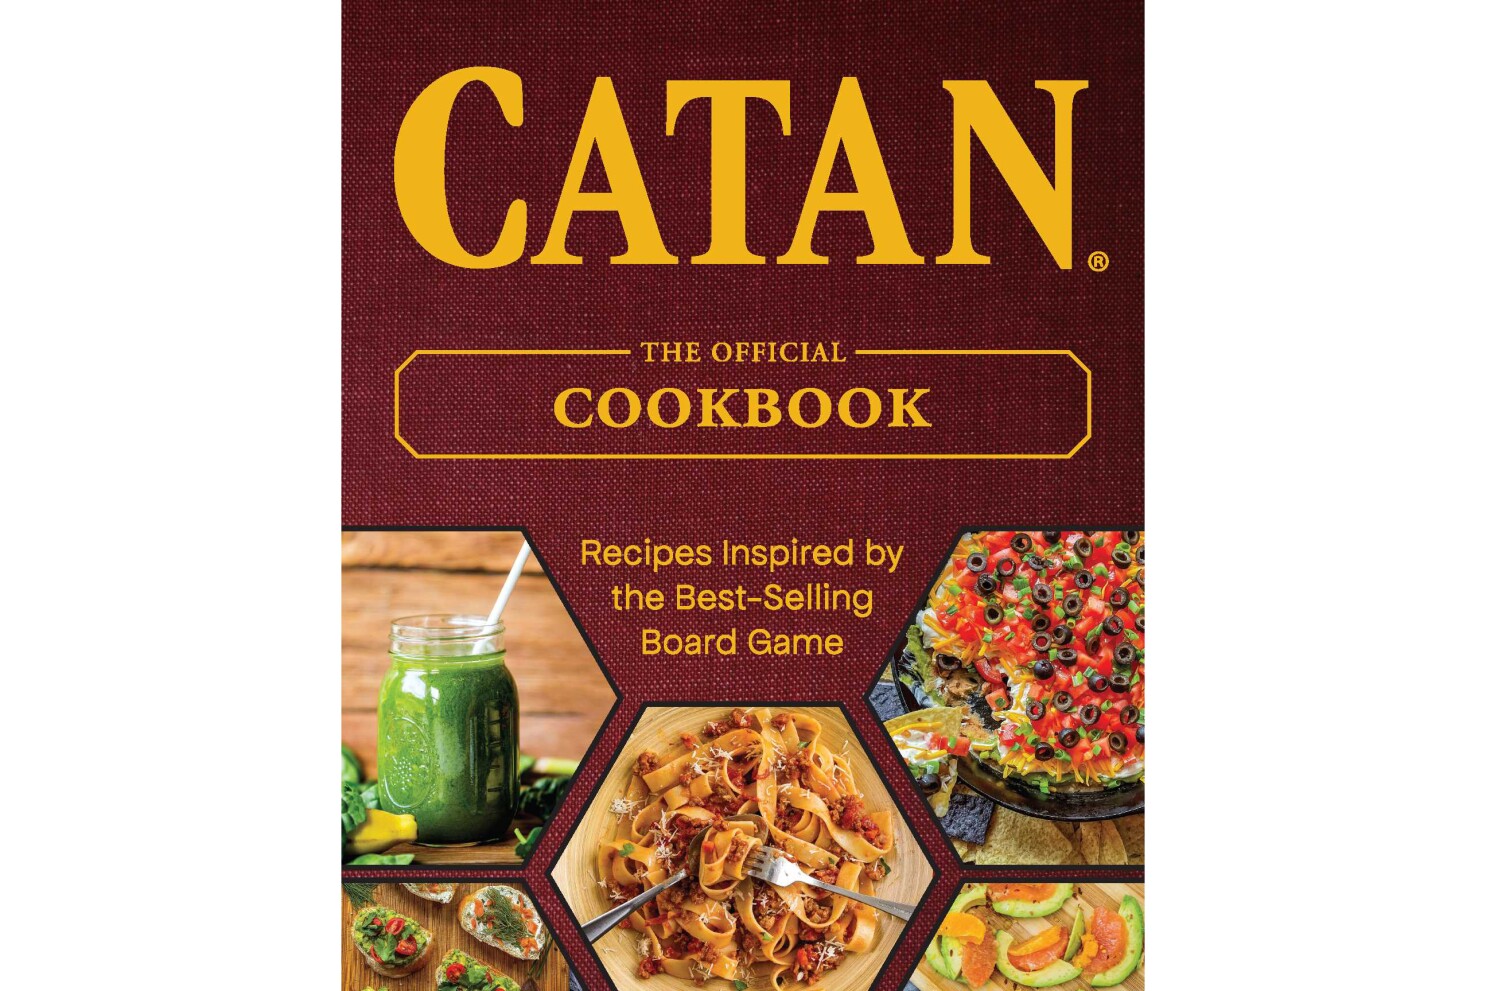 Get a taste of the world of Catan with a cookbook inspired by the